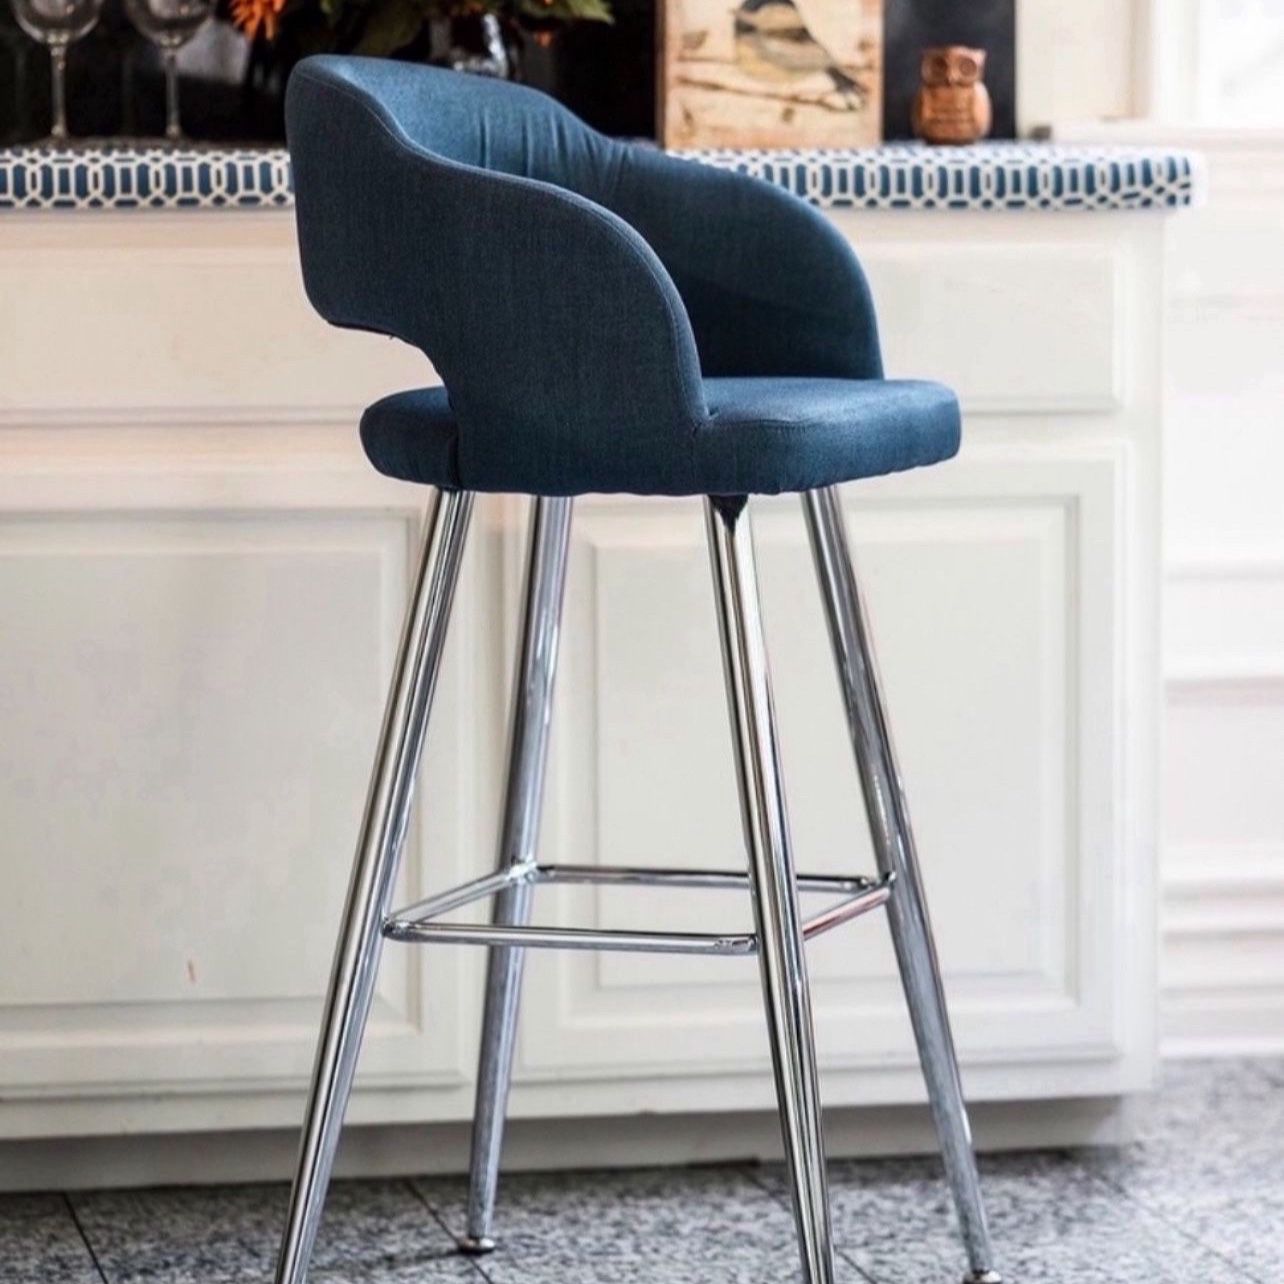 A set of 2 Contemporary Modern Counter Height Barstools / Chairs